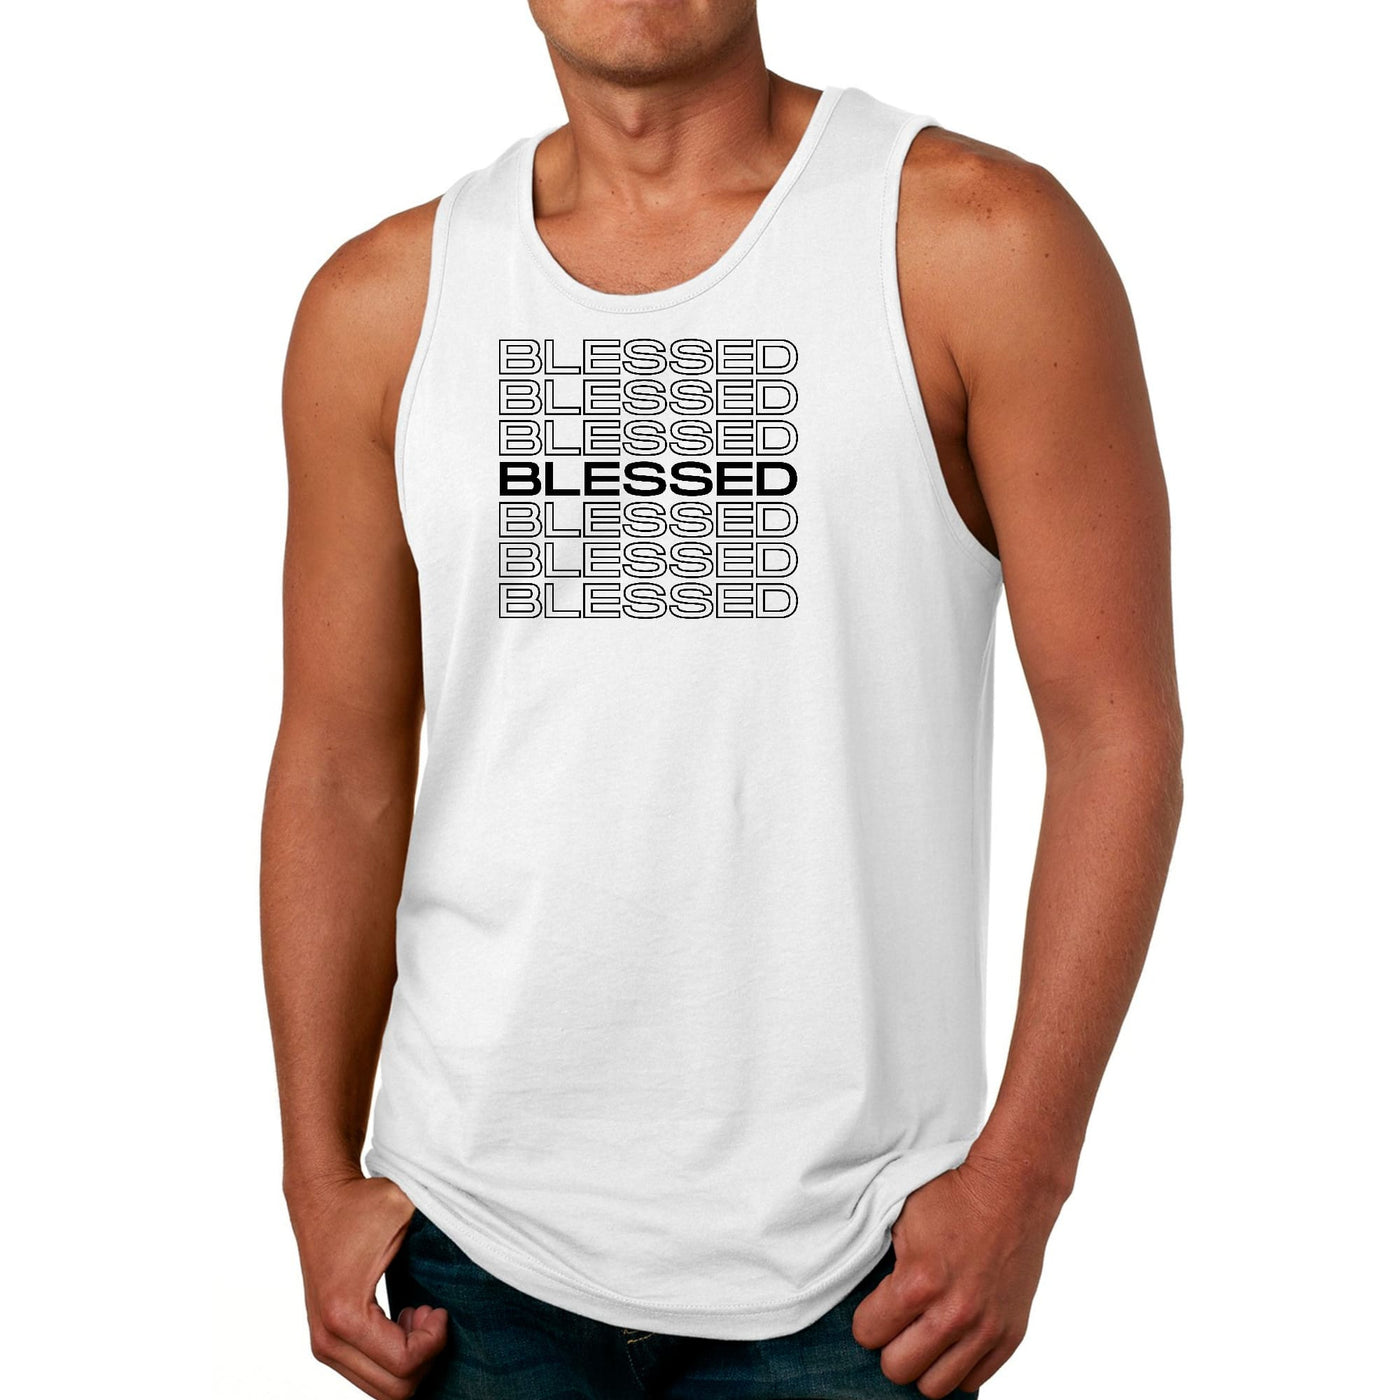 Mens Tank Top Fitness T - shirt Stacked Blessed Print - Tops